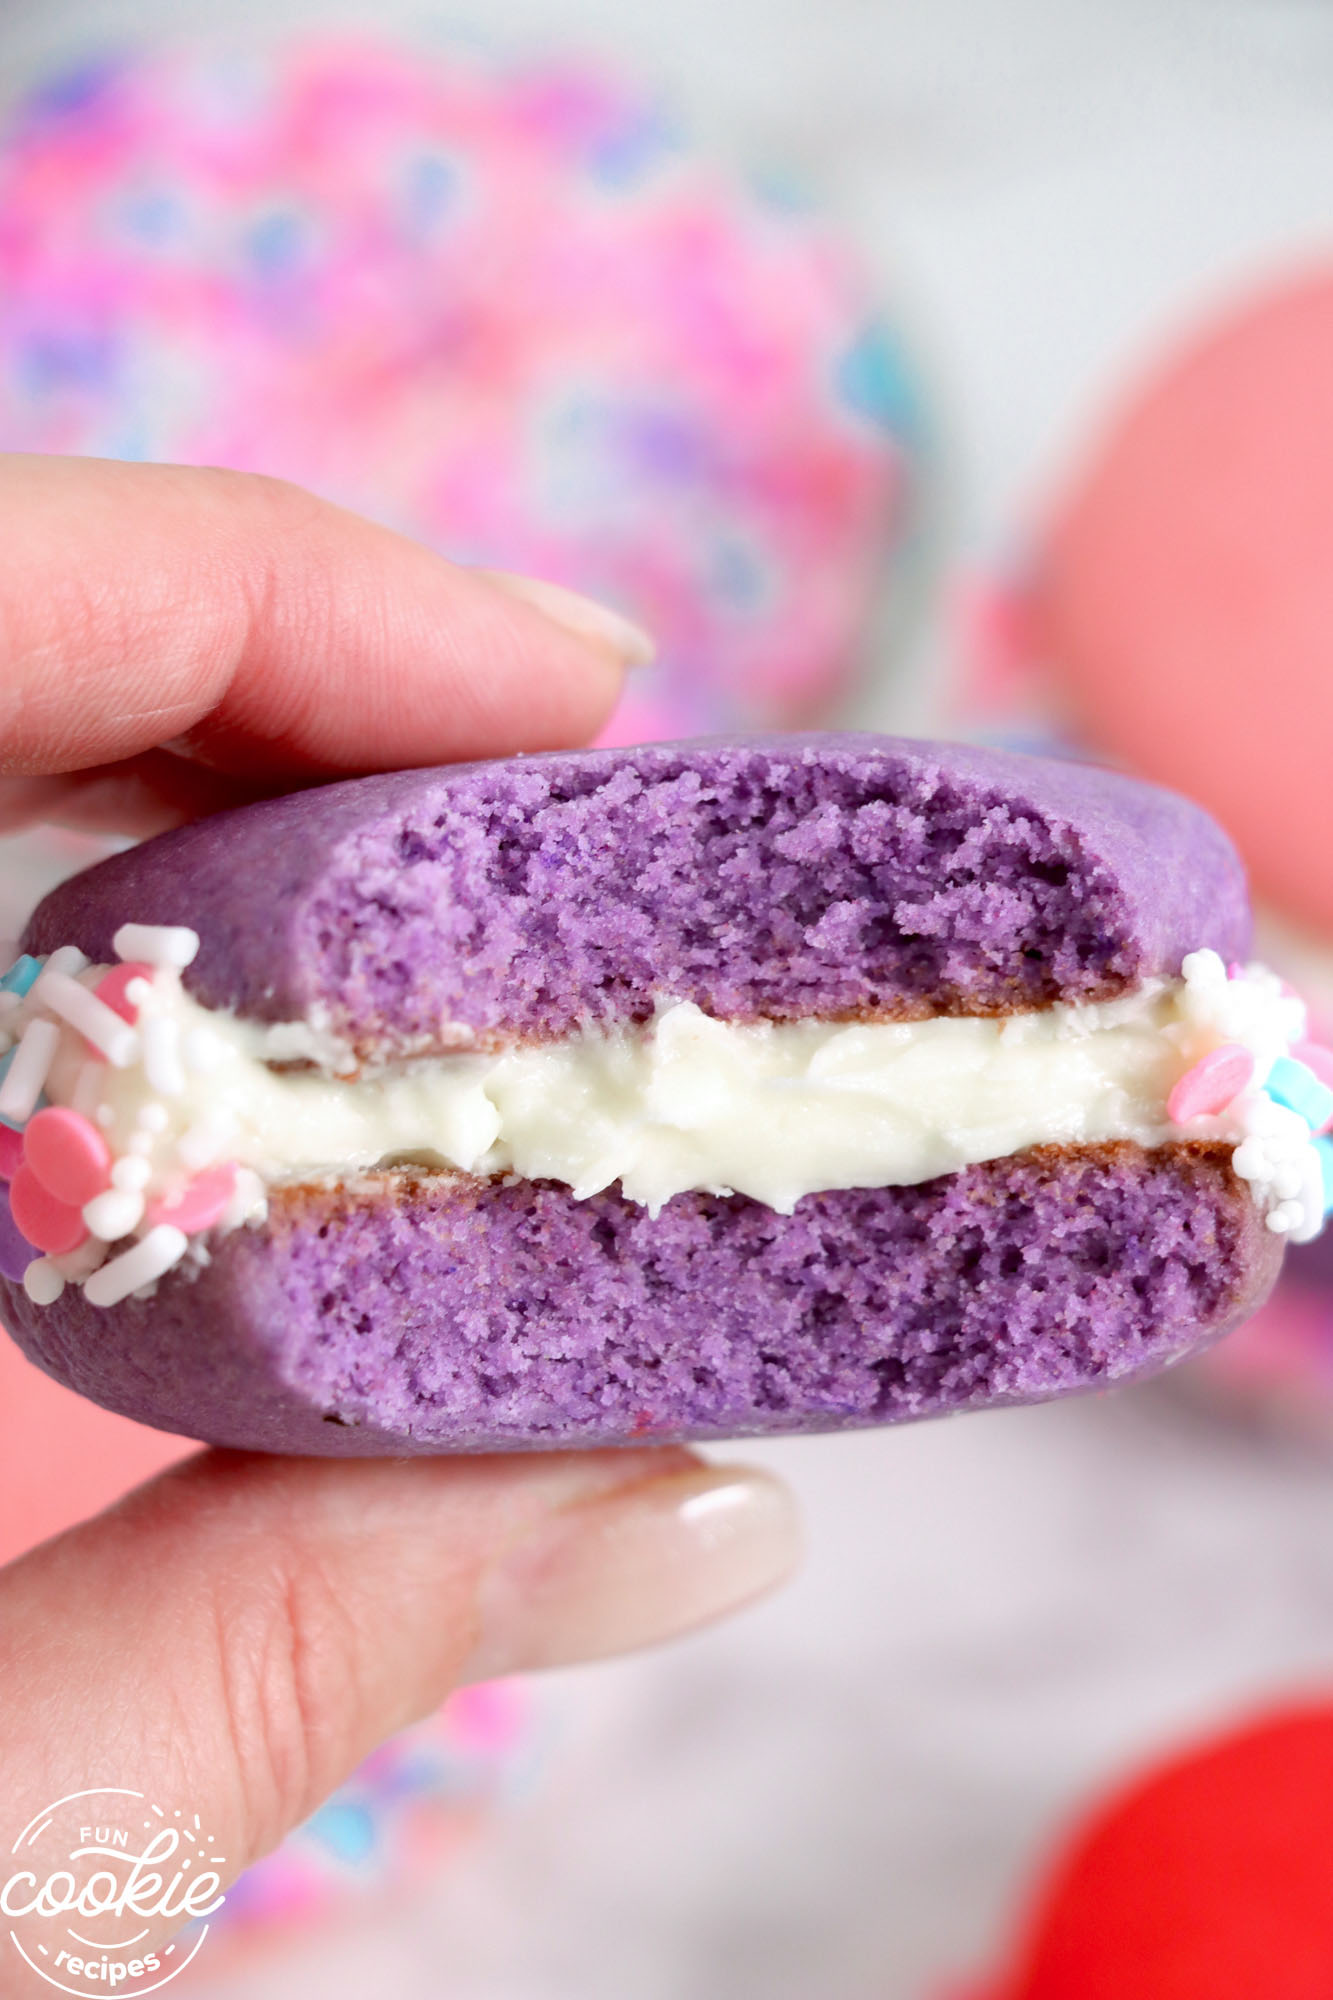 a purple whoopie pie, bitten into to show the filling, held by a hand.